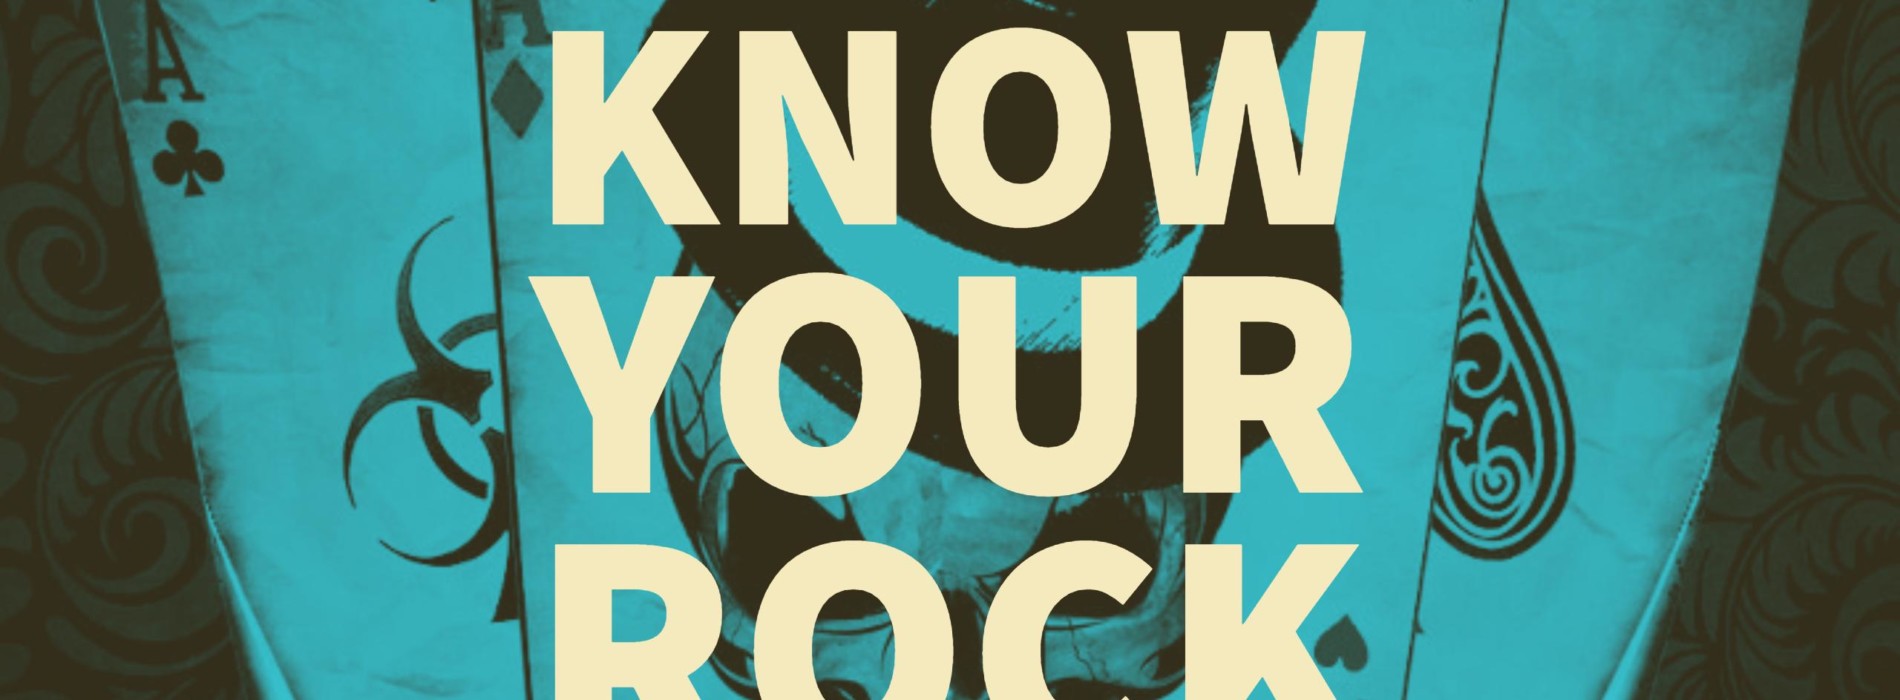 Get To Know Your Rock : Magicians ToolBox